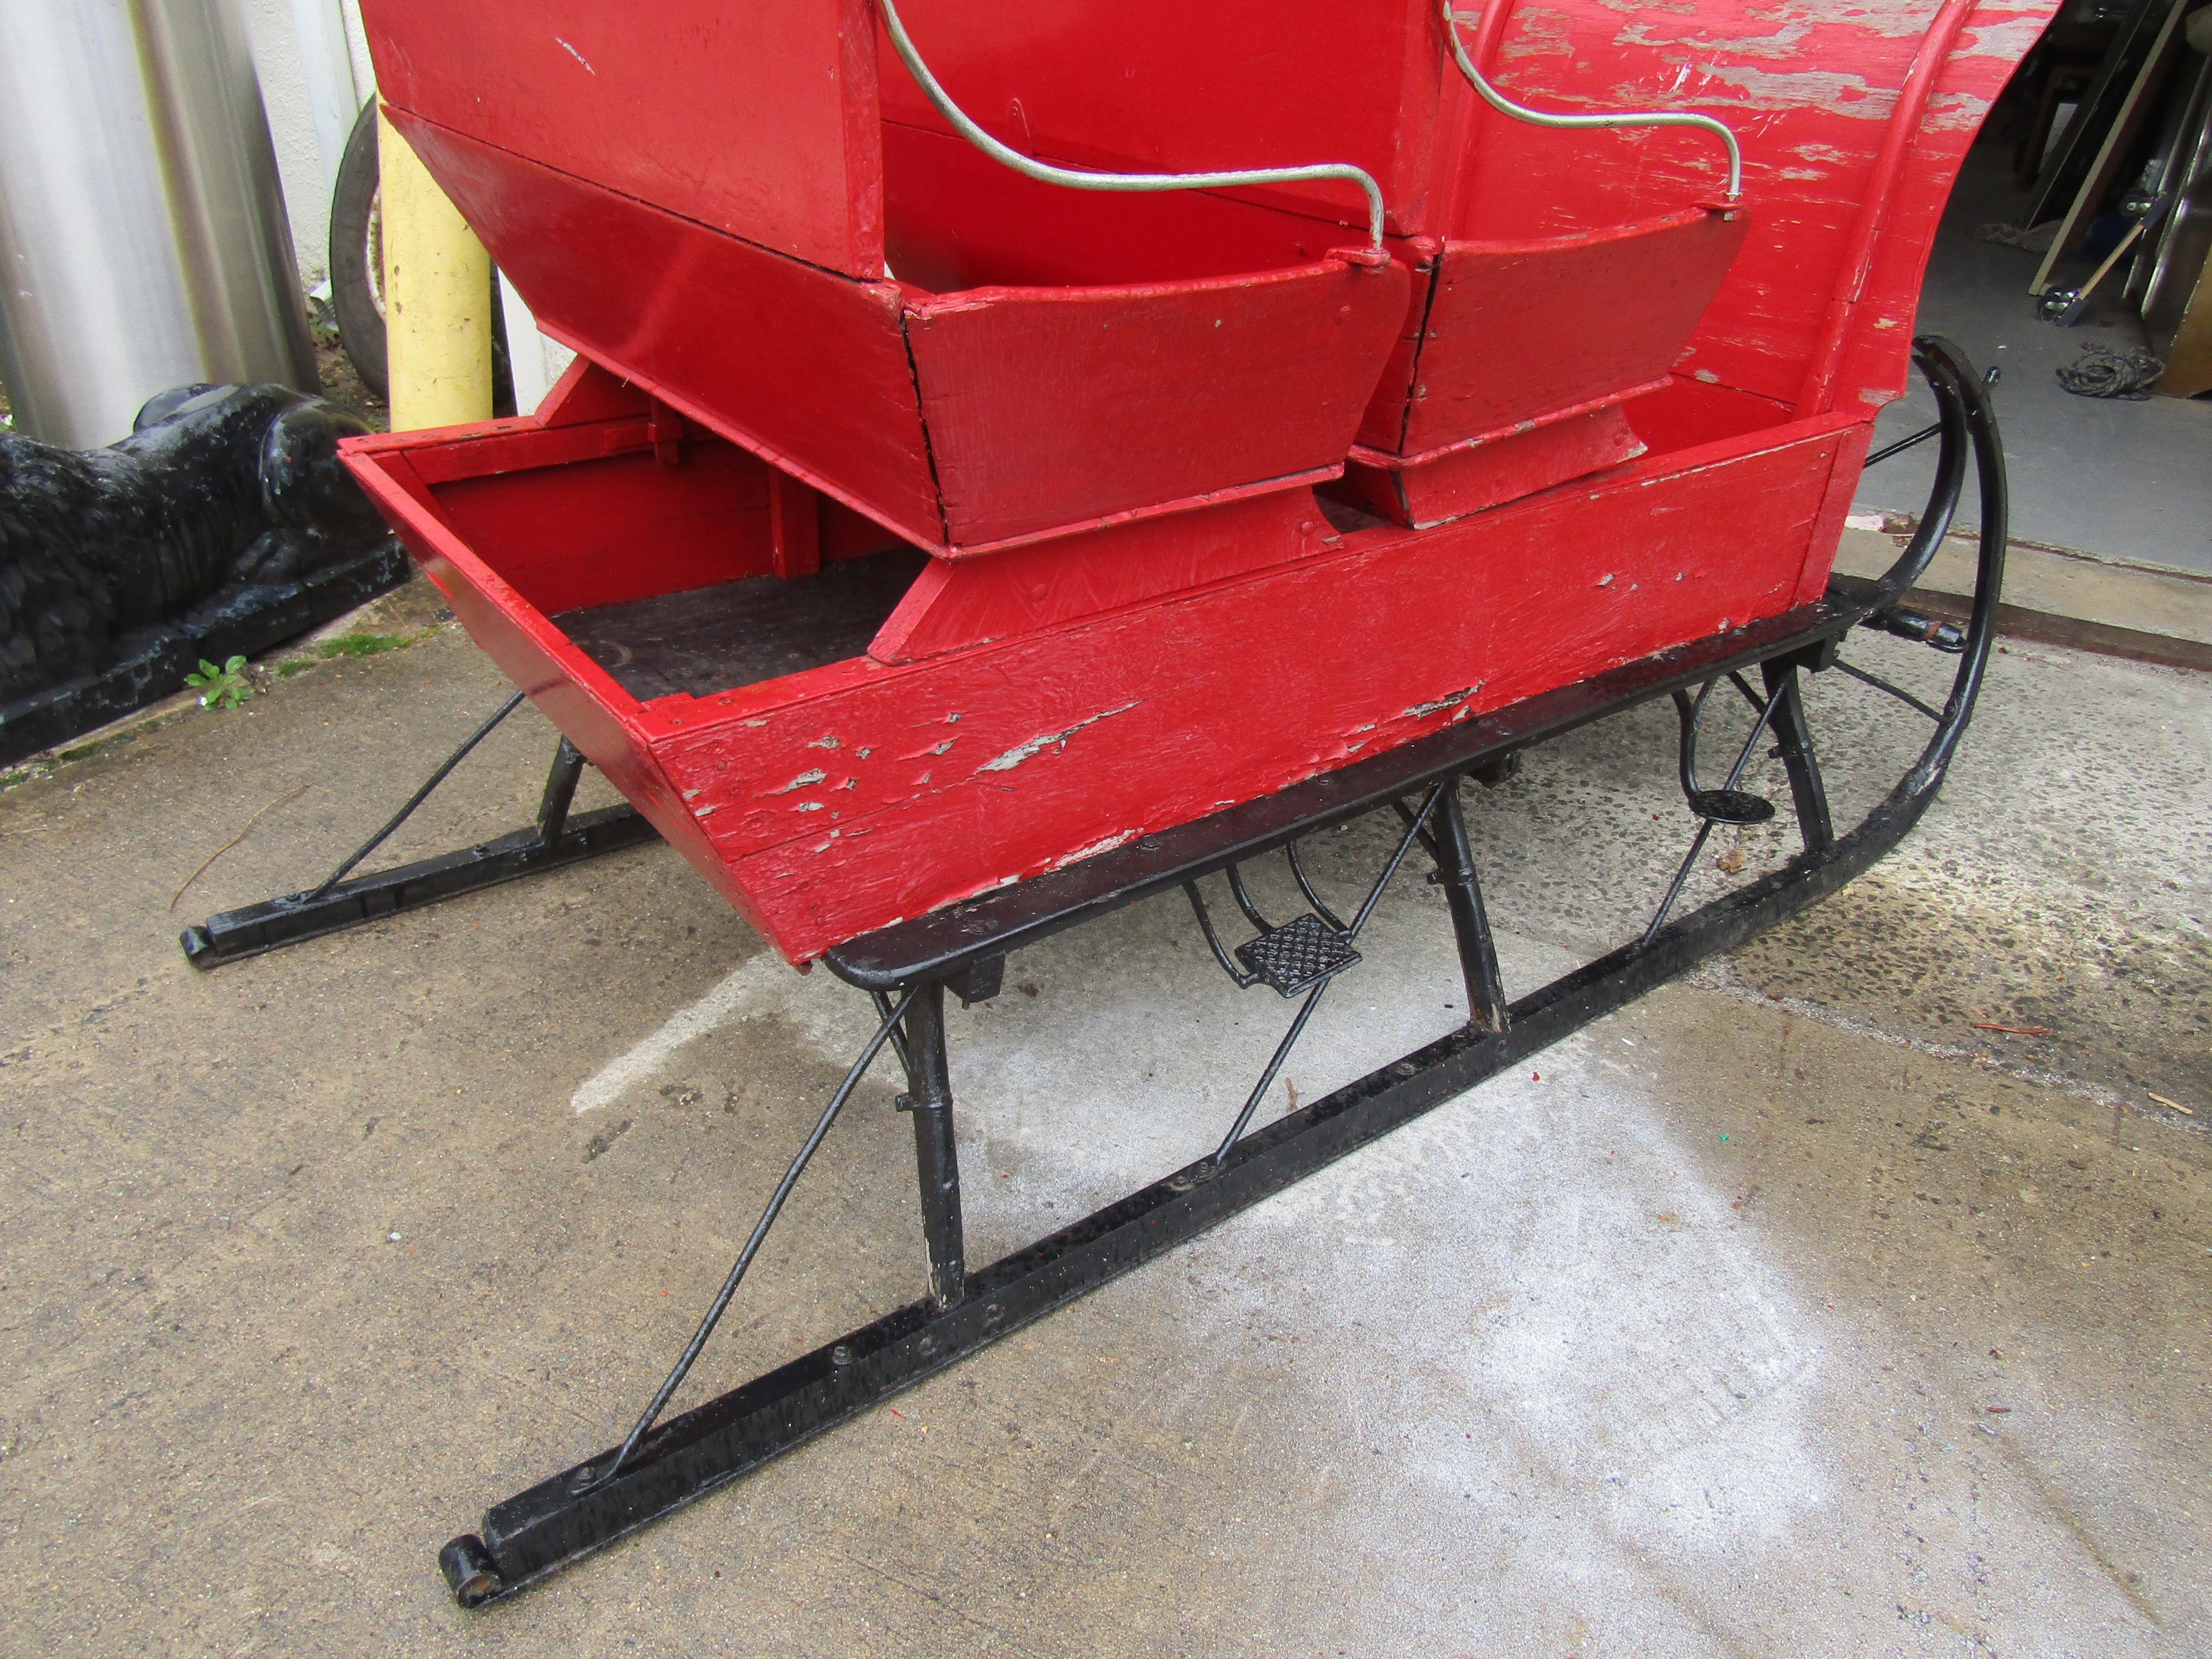 Beautiful antique cutter sleigh in red. This piece features a wooden top with 2 seats, all metal frame and vintage mojo perfect for any seasonal Christmas decor.